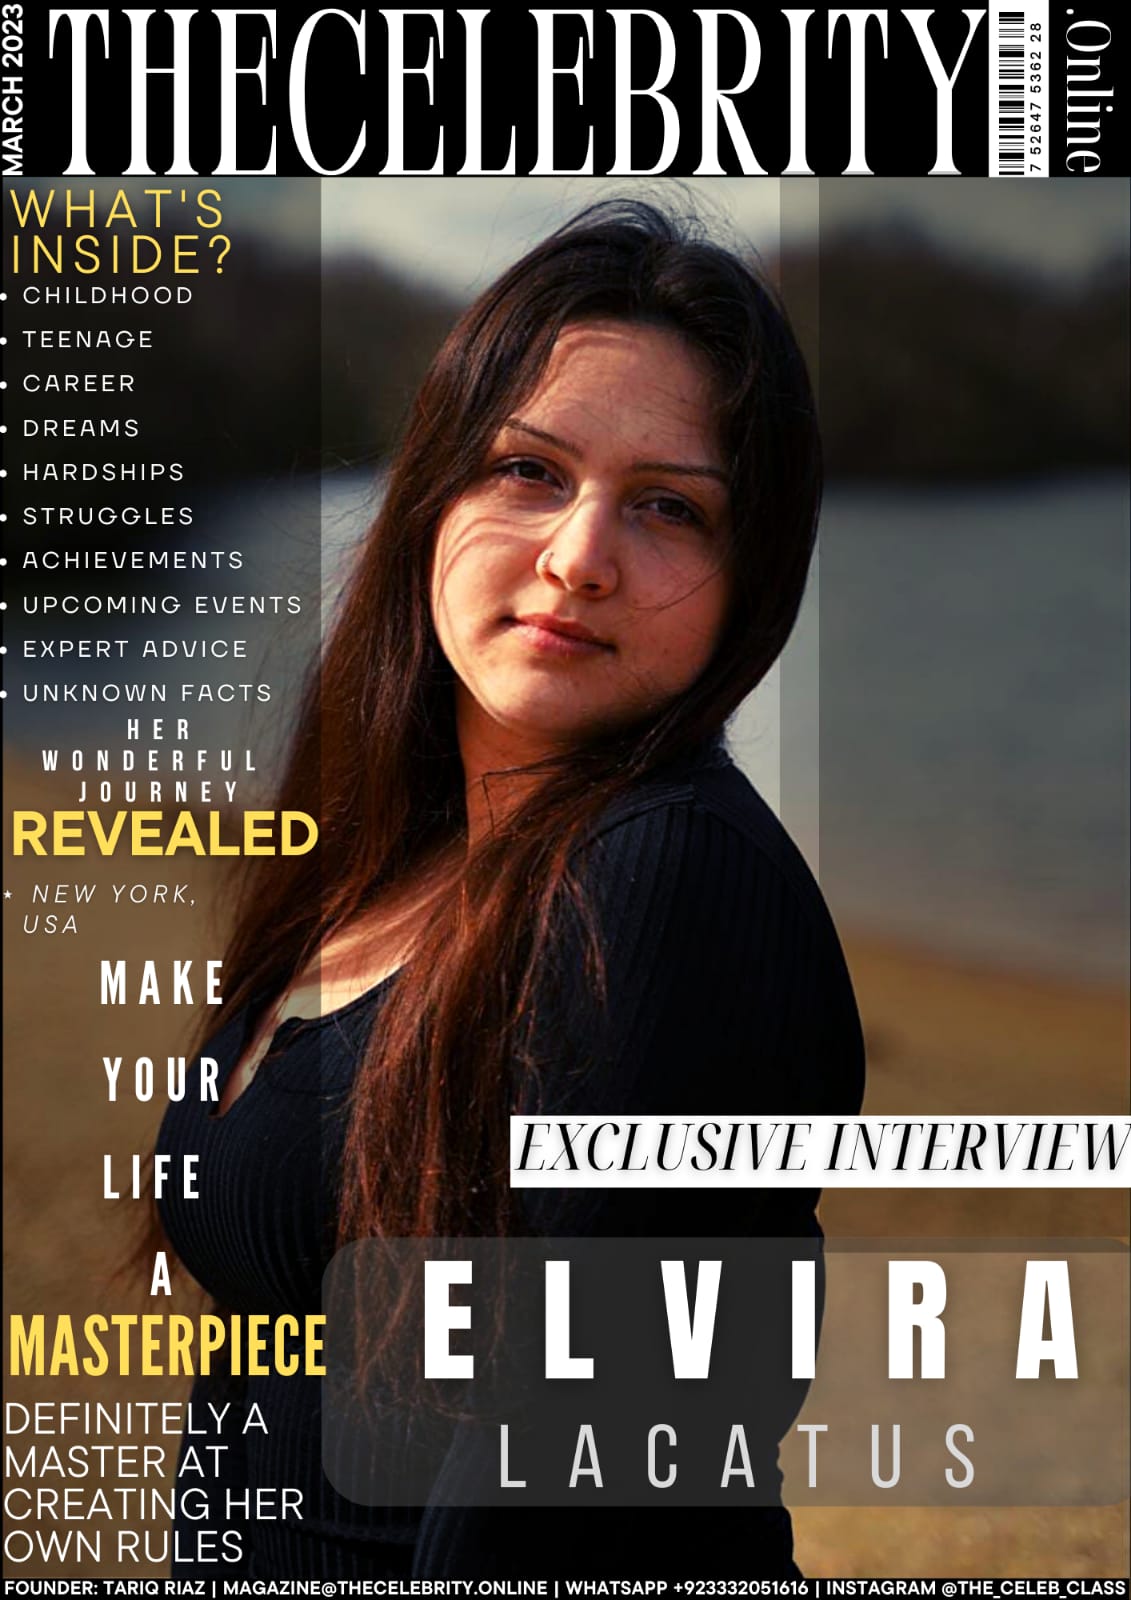 Elvira Lacatus Exclusive Interview – ‘You’re Unique In Your Own Way’